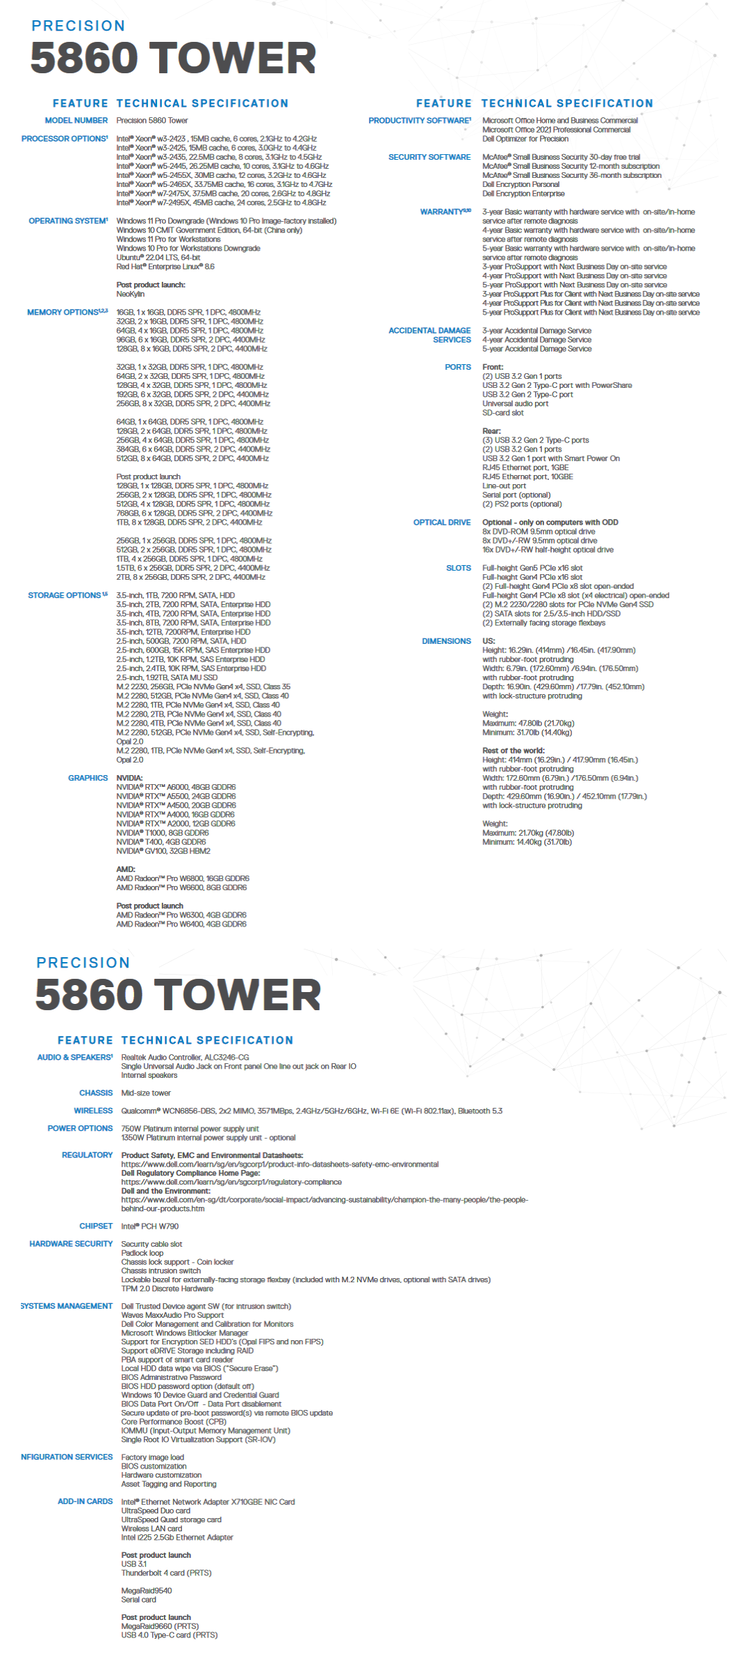 Dell Precision 5860 Tower specifications